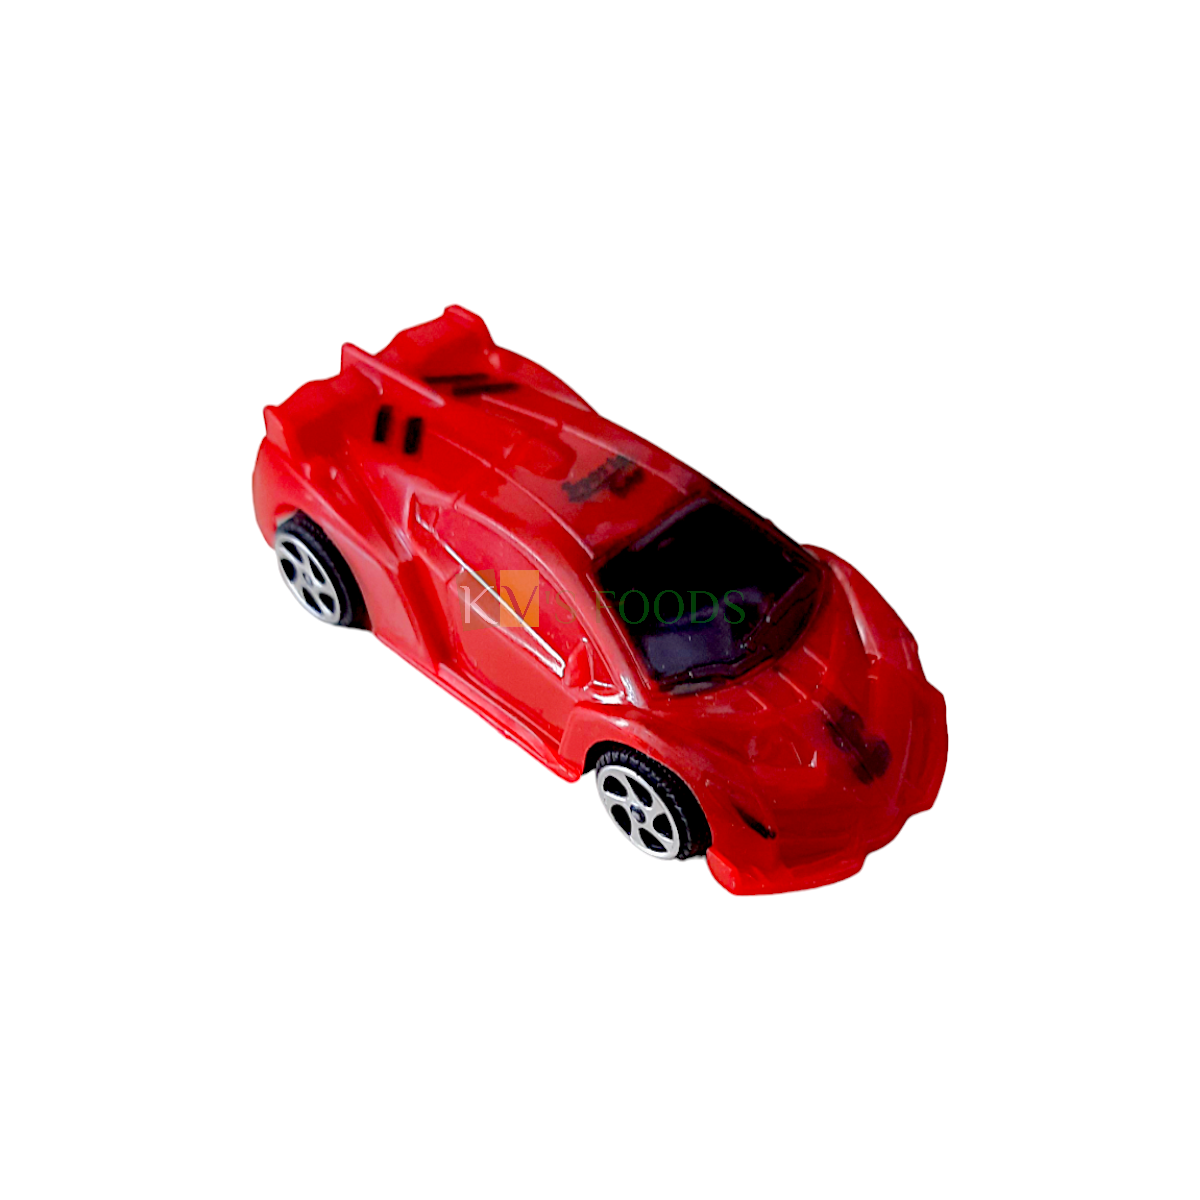 1PC Red Racing Car Cake Topper Kids Boys Car Theme Happy Birthday Push GO Car Toy Miniature Figurine, Friction Toy Cars, Gifts Childrens Play Toys, Figure for Room Shelf Bookstore DIY Cake Decorations